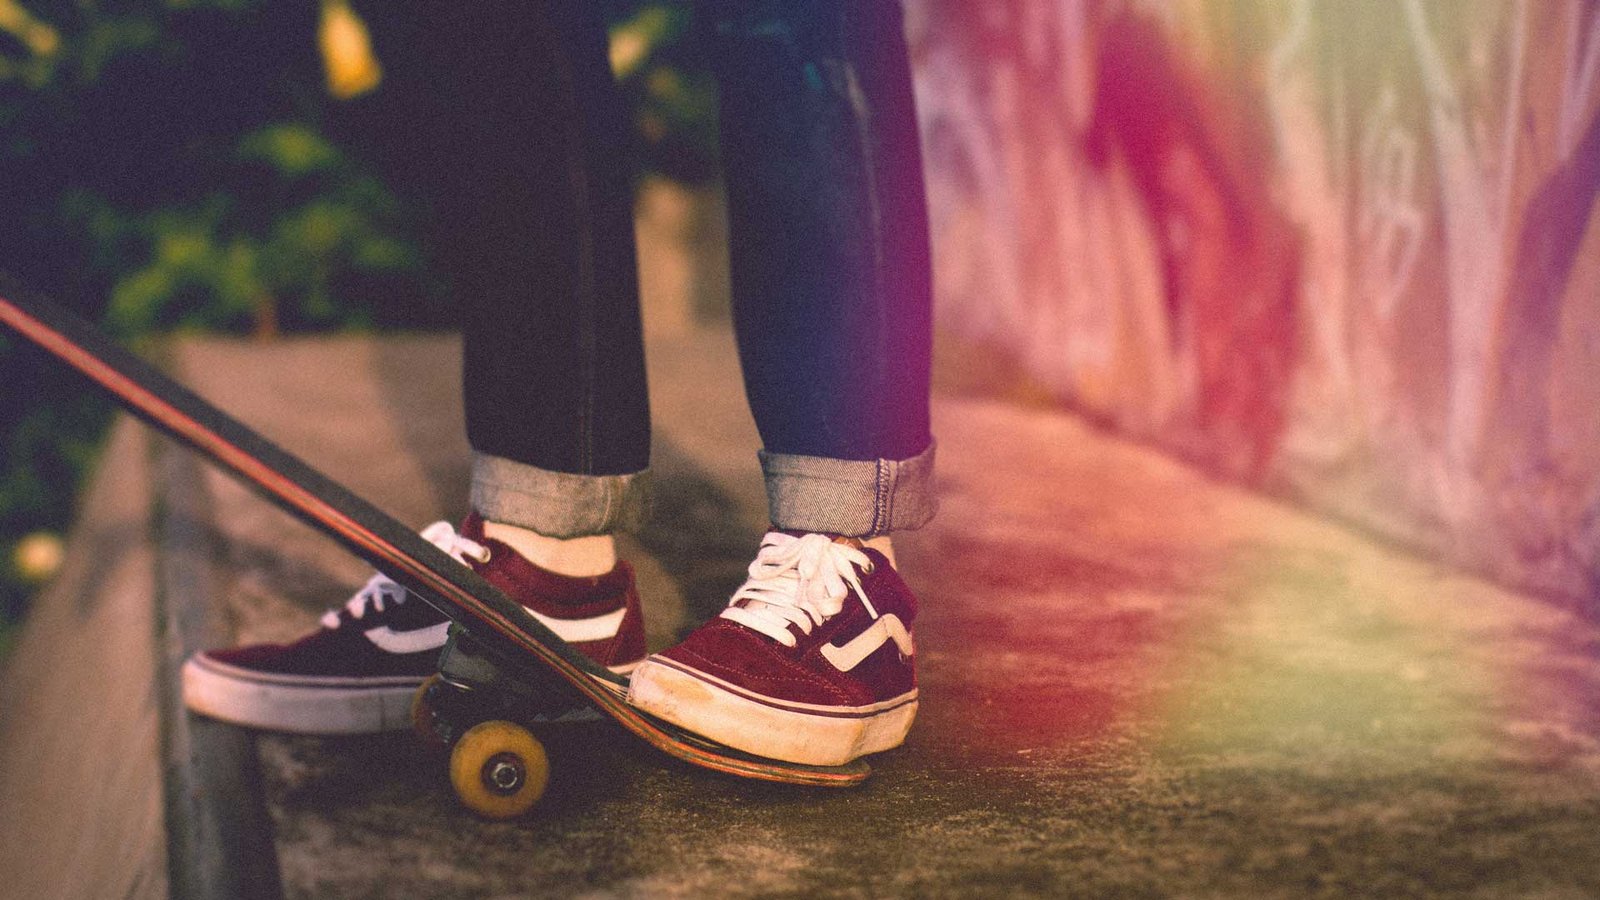 Why You Should Need Skateboard Shoes To Skate